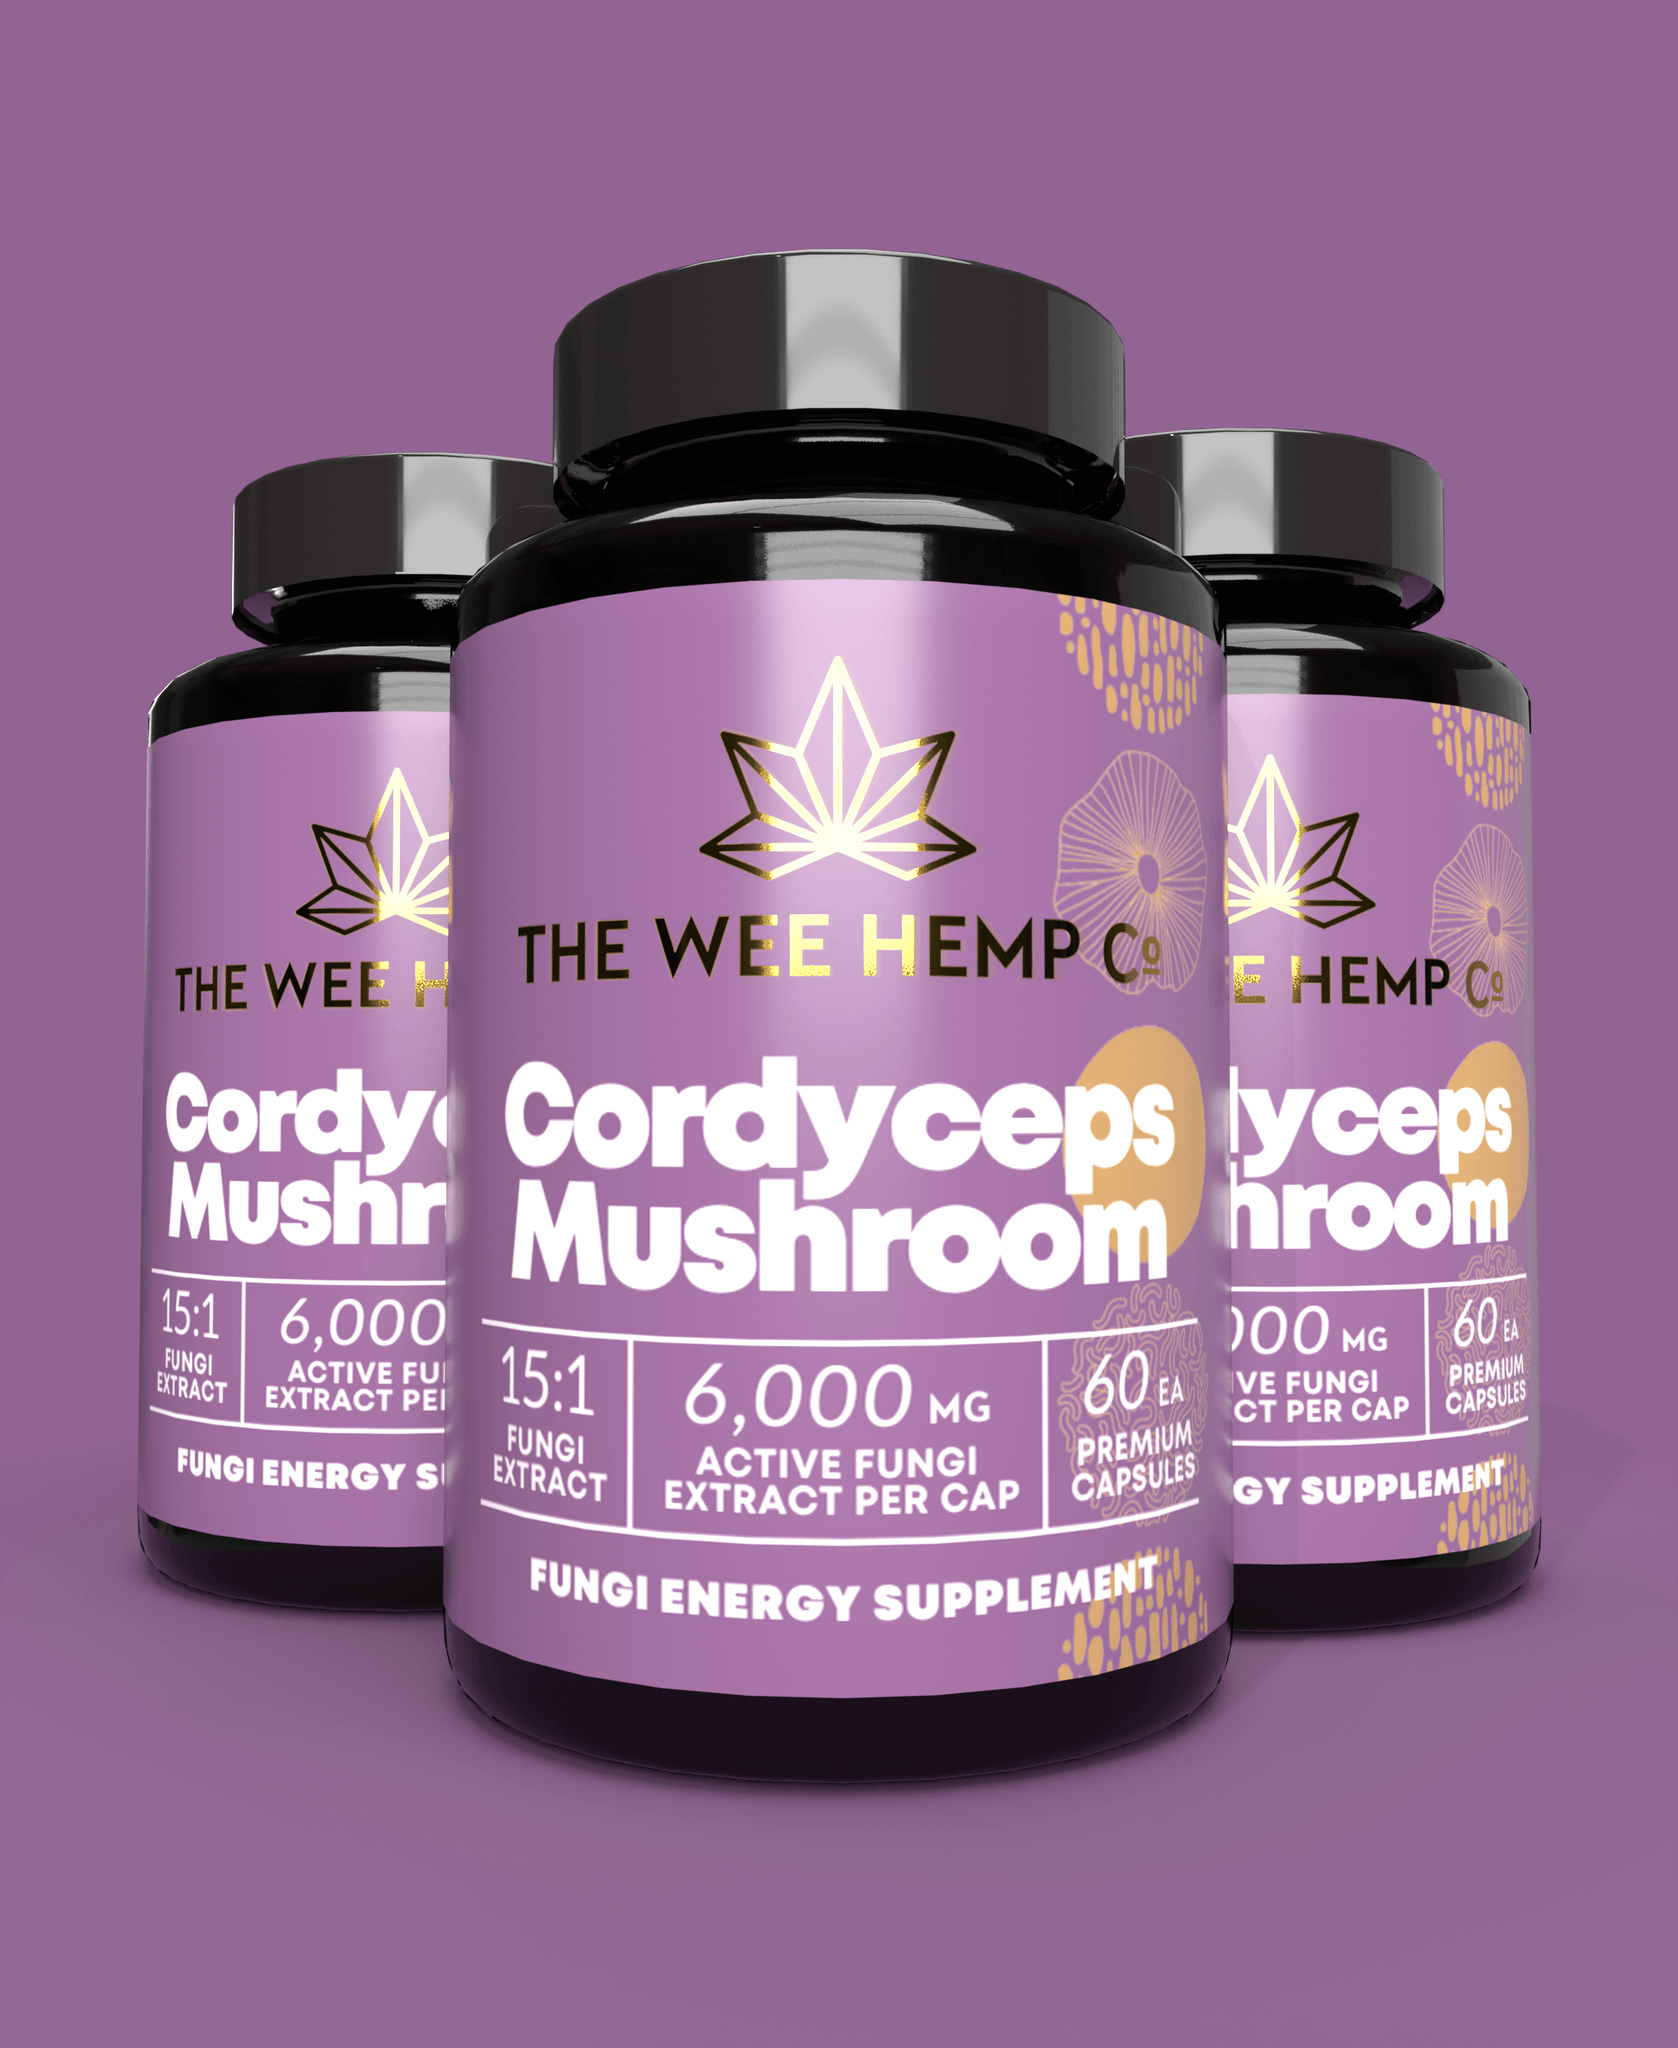 Cordyceps Mushroom Clean Extract, No Bulking Agents. The Wee Hemp Company, Aberdeenshire, Scotland. Blue background with mushroom supplements in foreground. Scotland's Leading CBD Company.